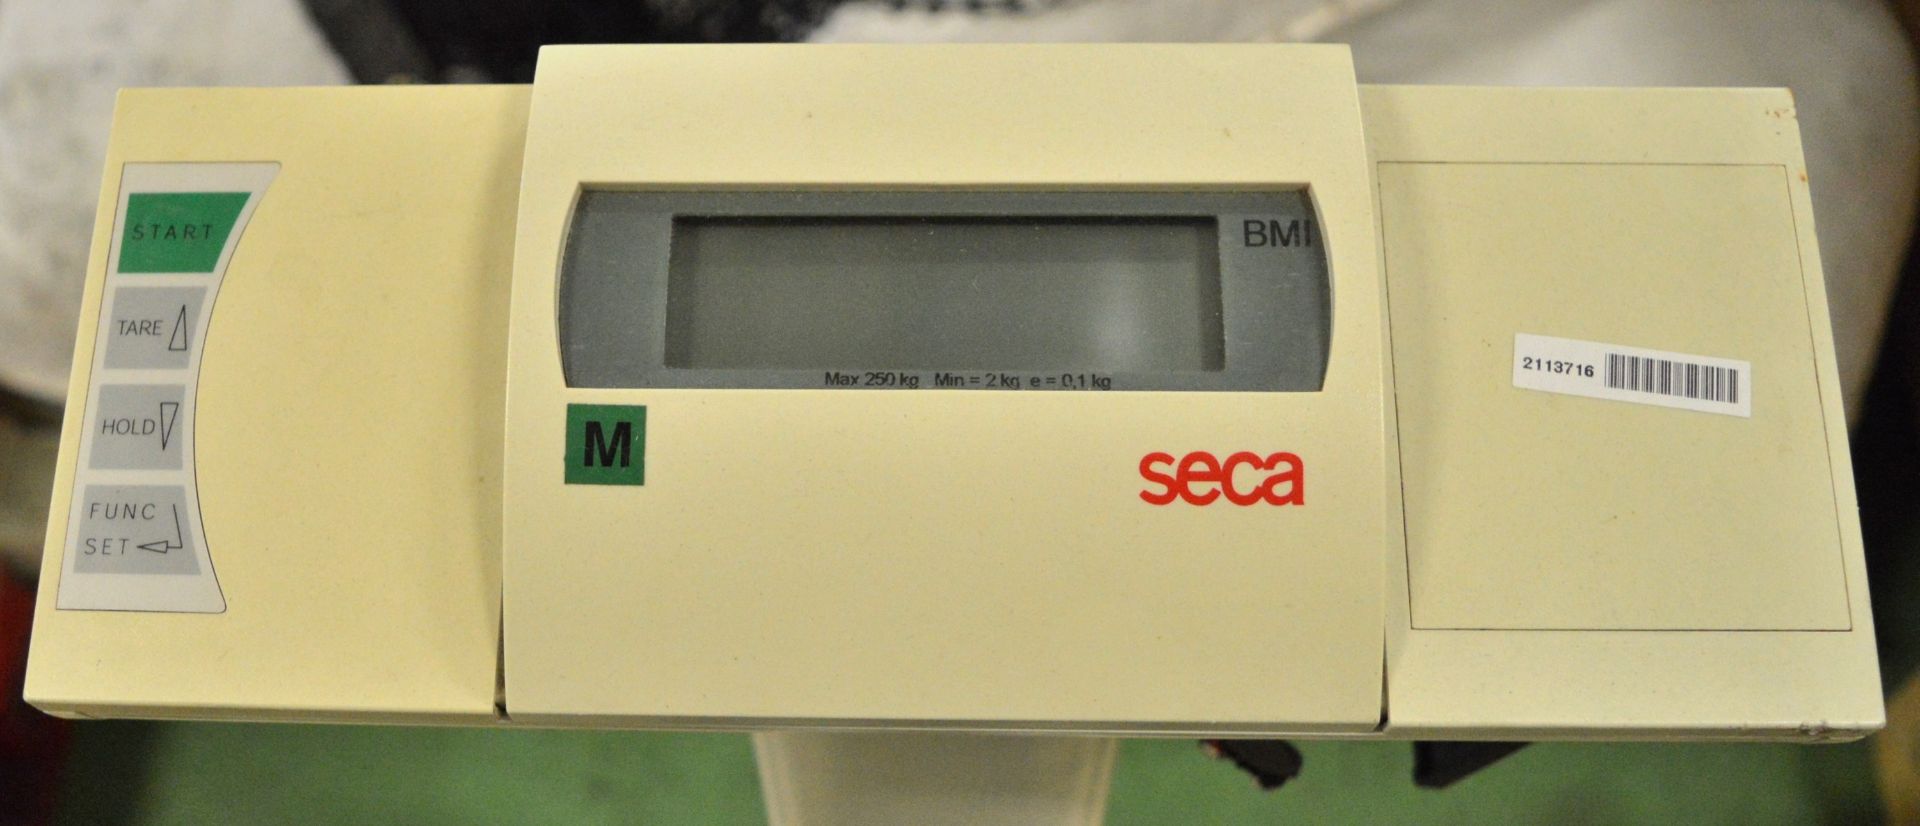 Seca Scales - Image 2 of 3